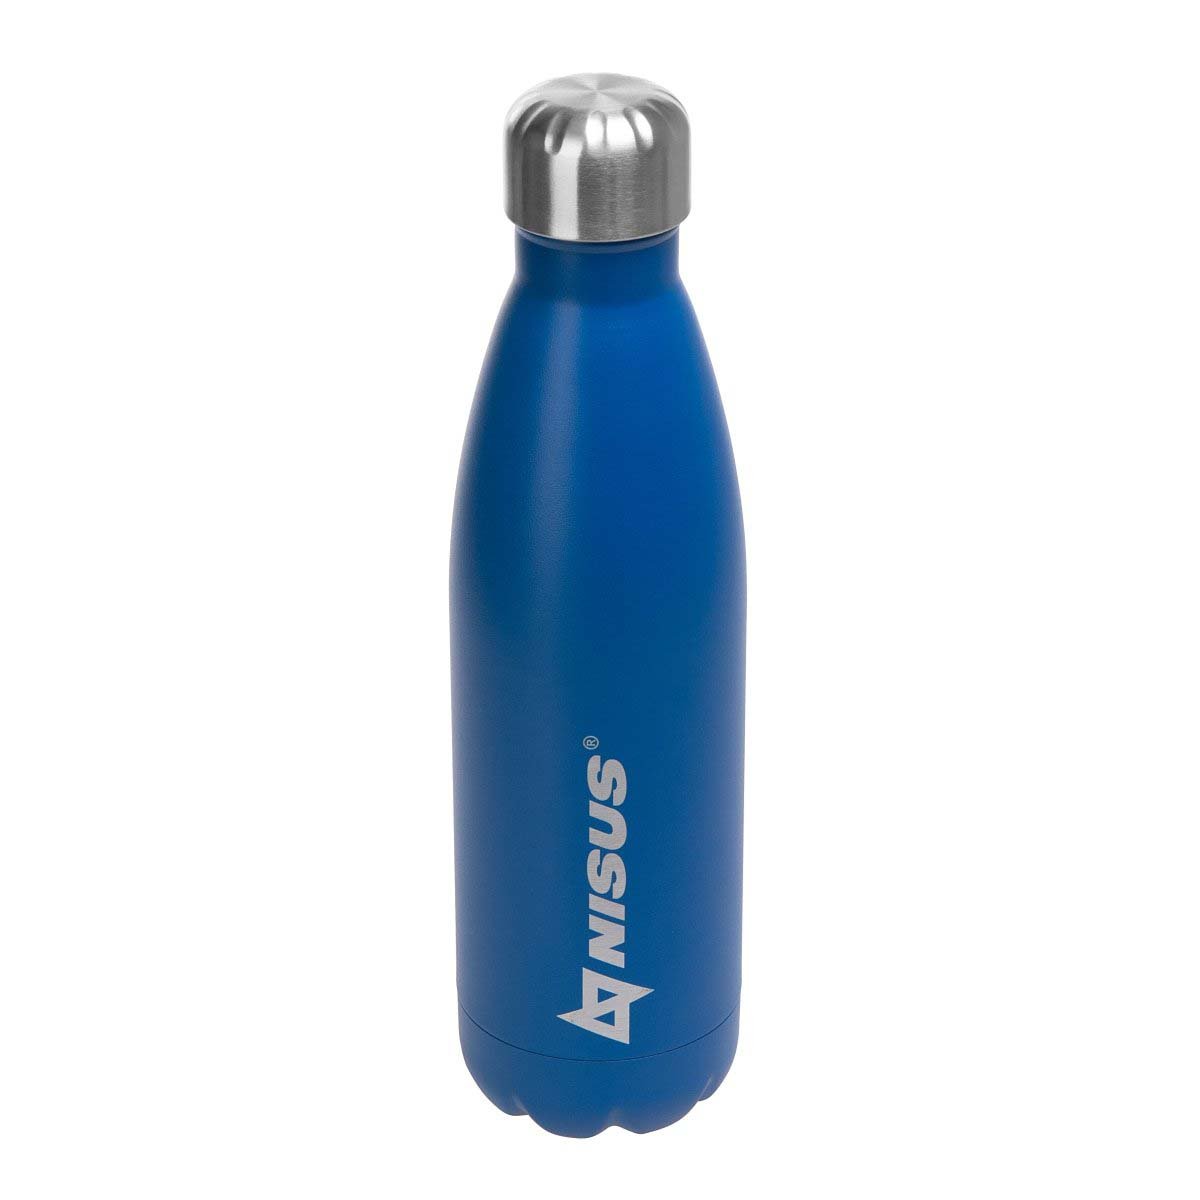 Stainless Steel Insulated Twist Top Water Bottle, 17 oz, blue